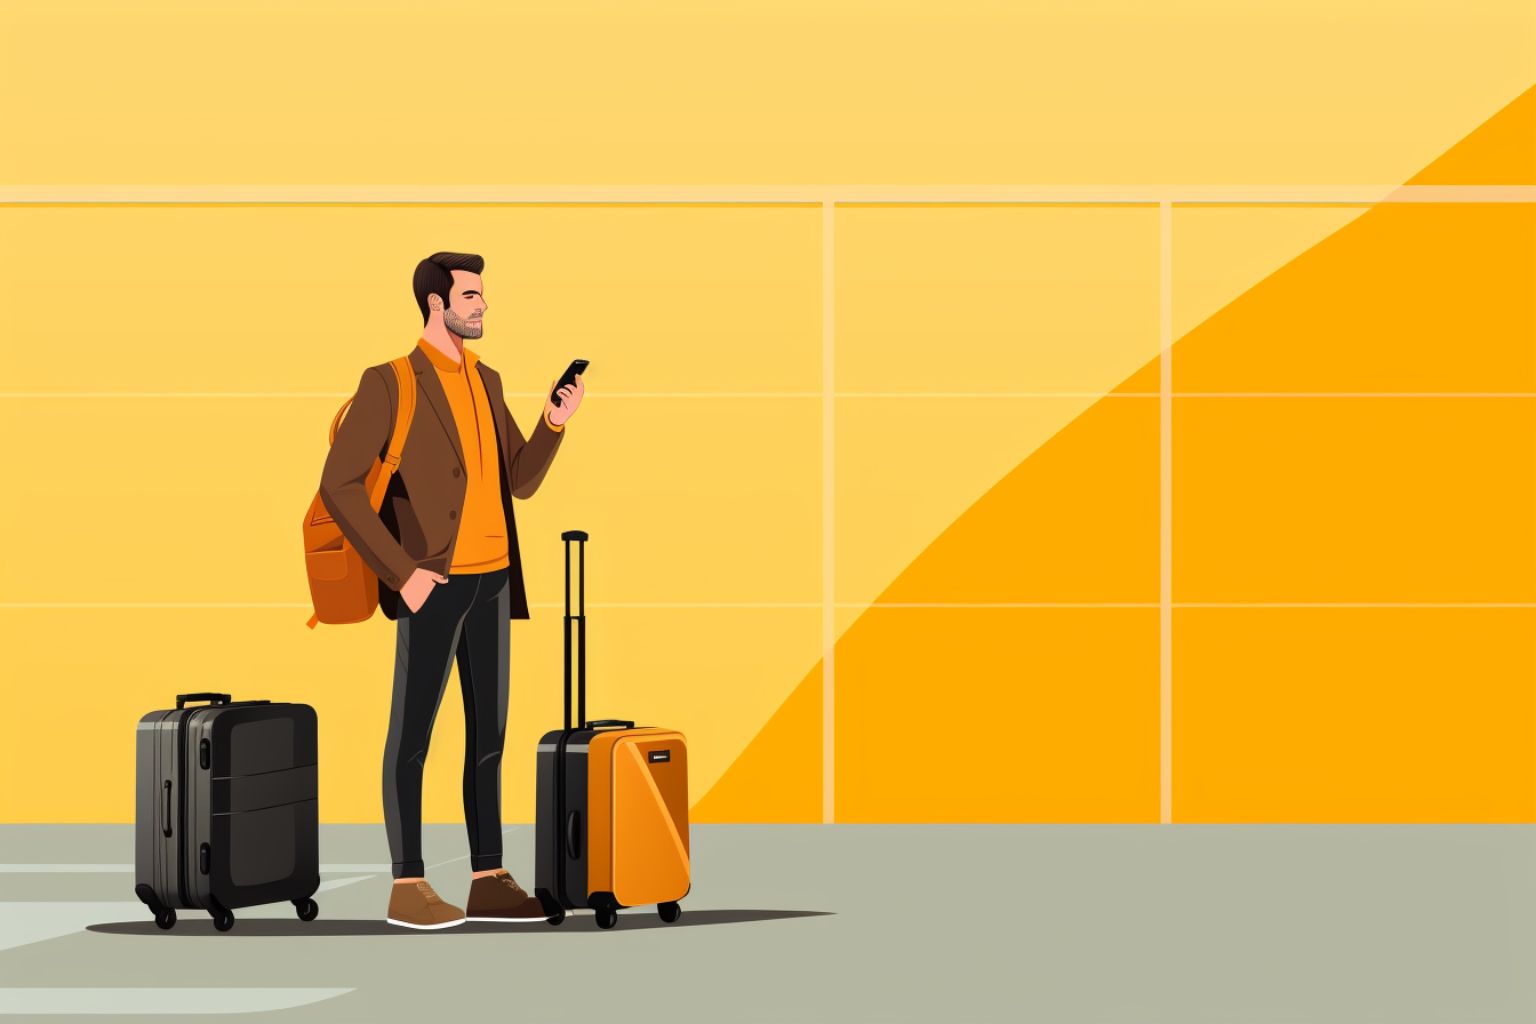 In a quest for better customer service, frustrated travelers like Robert Grunfeld are recording their calls with airlines. While this tactic can yield mixed results, experts suggest alternative strategies, highlighting the complexities of customer service interactions and the evolving legal and ethical considerations in the digital age.